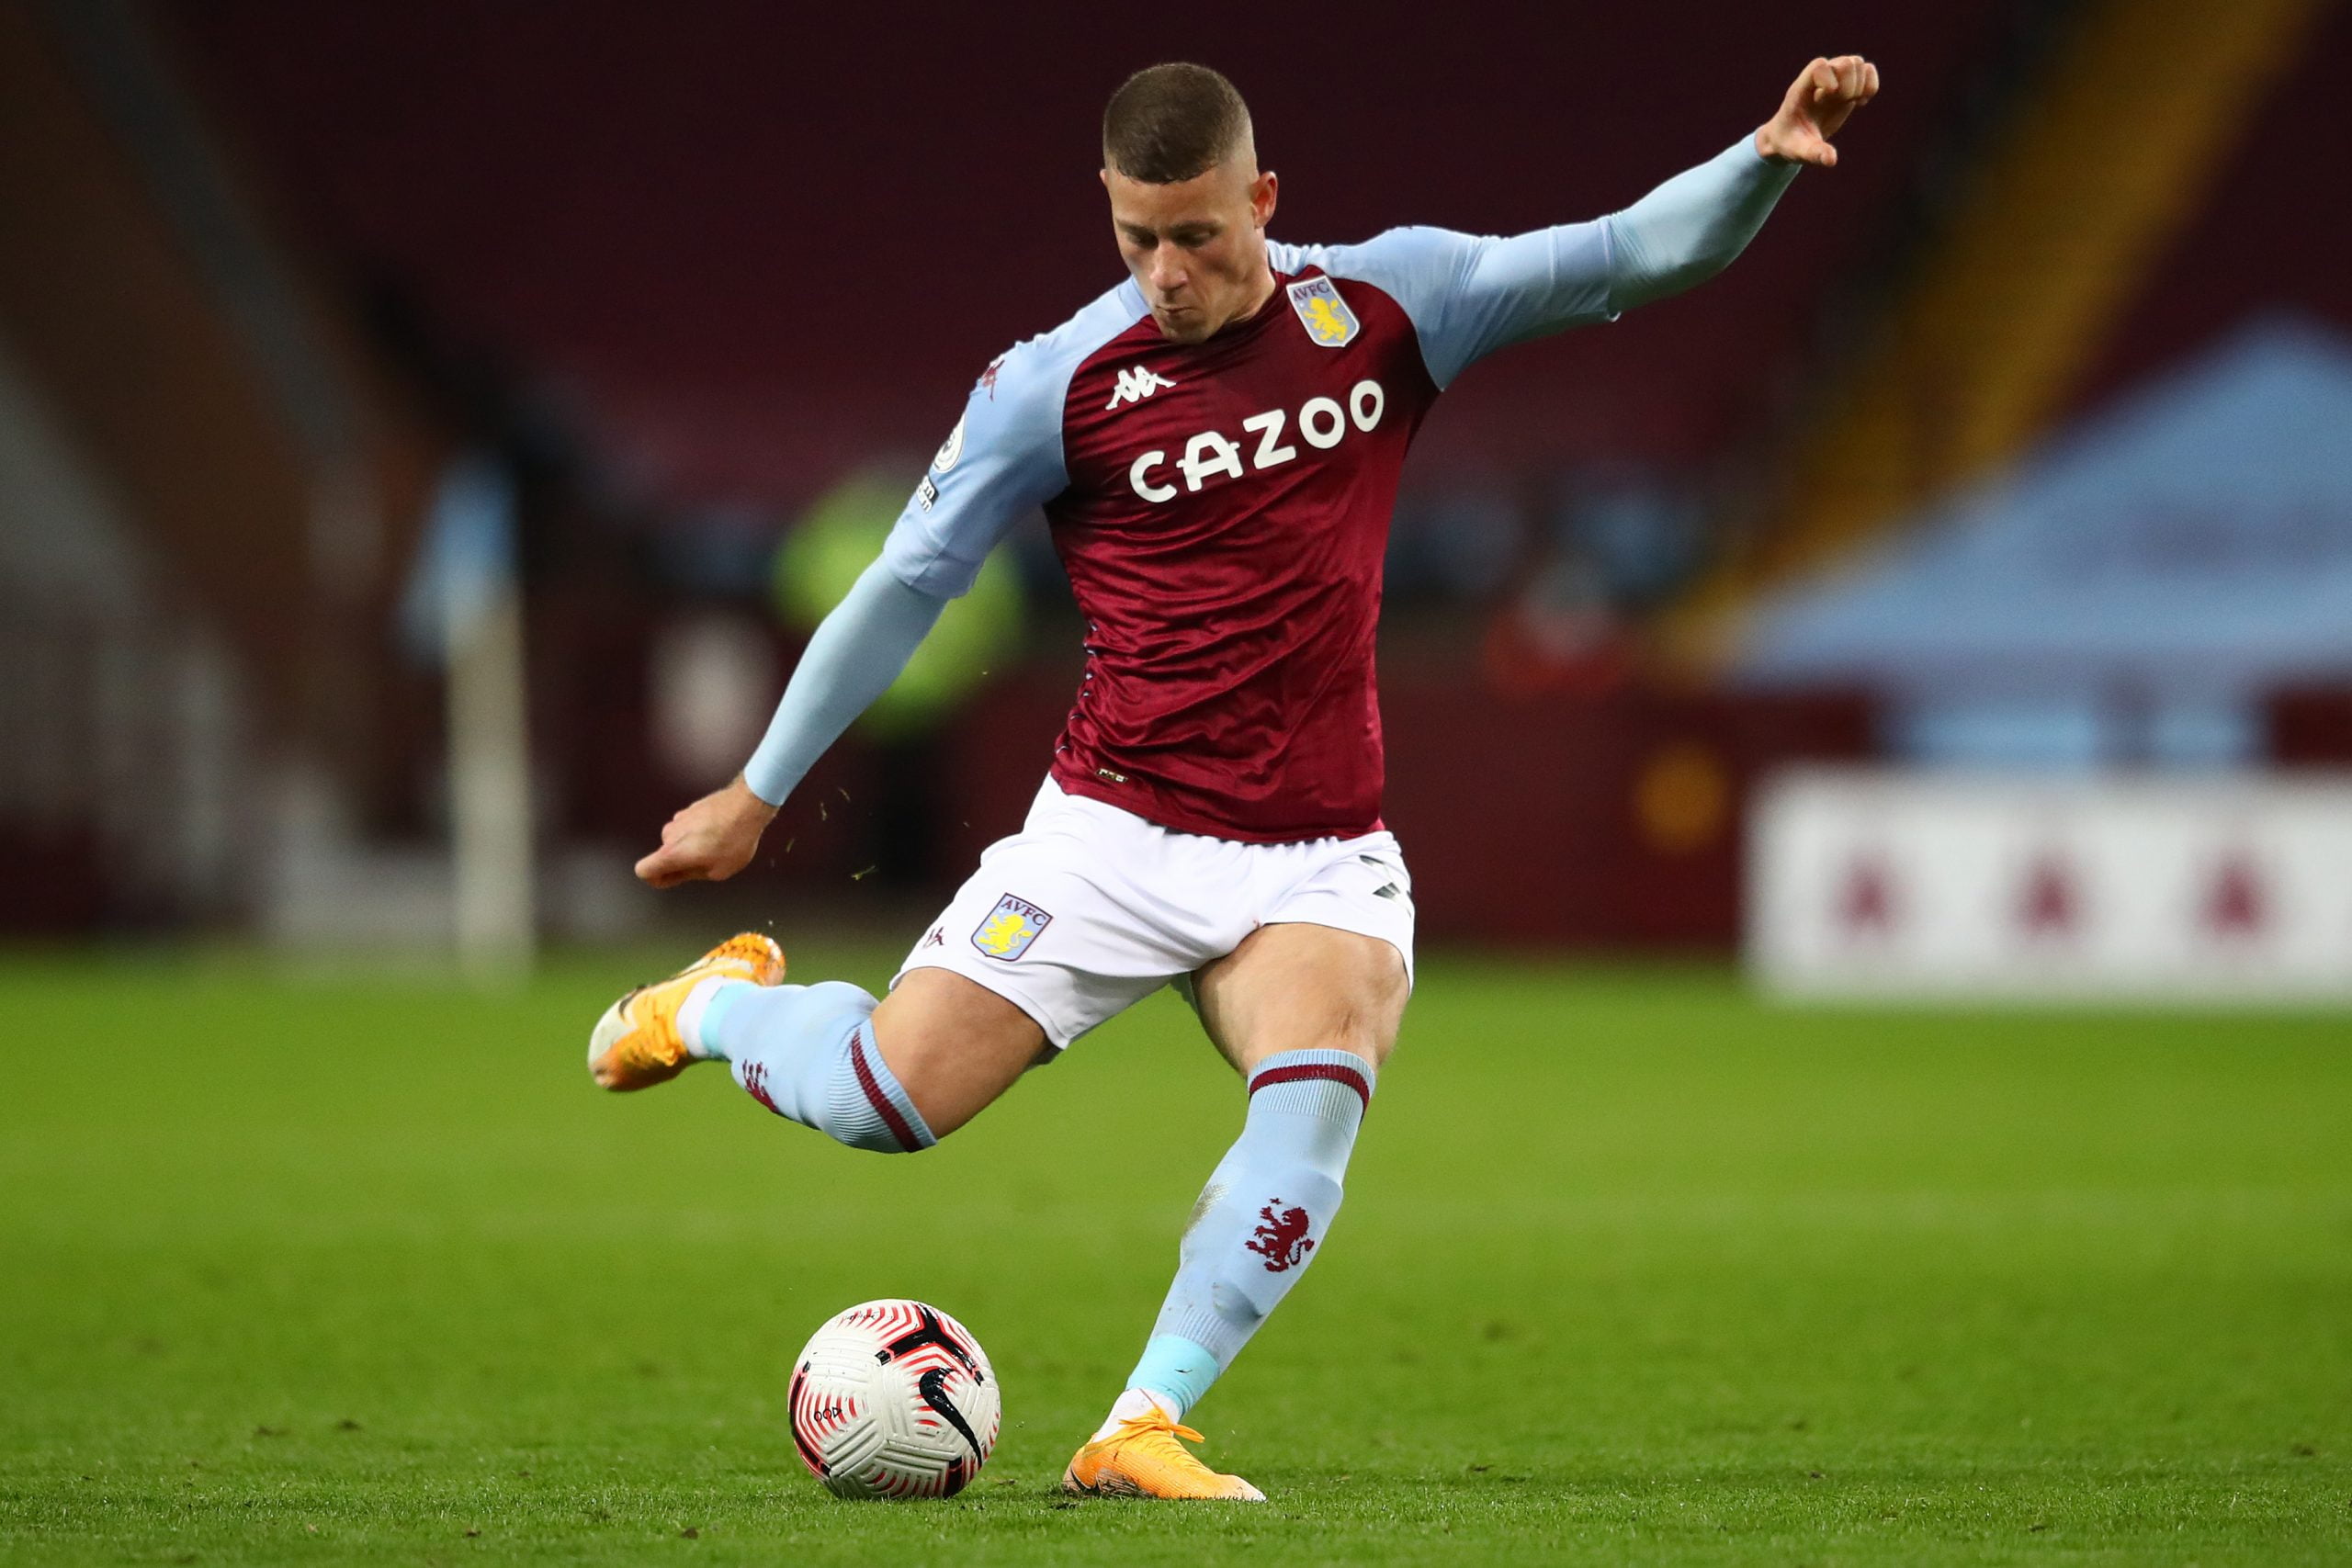 McAvennie urges Aston Villa to pay £35m for Ross Barkley who is in action in the picture